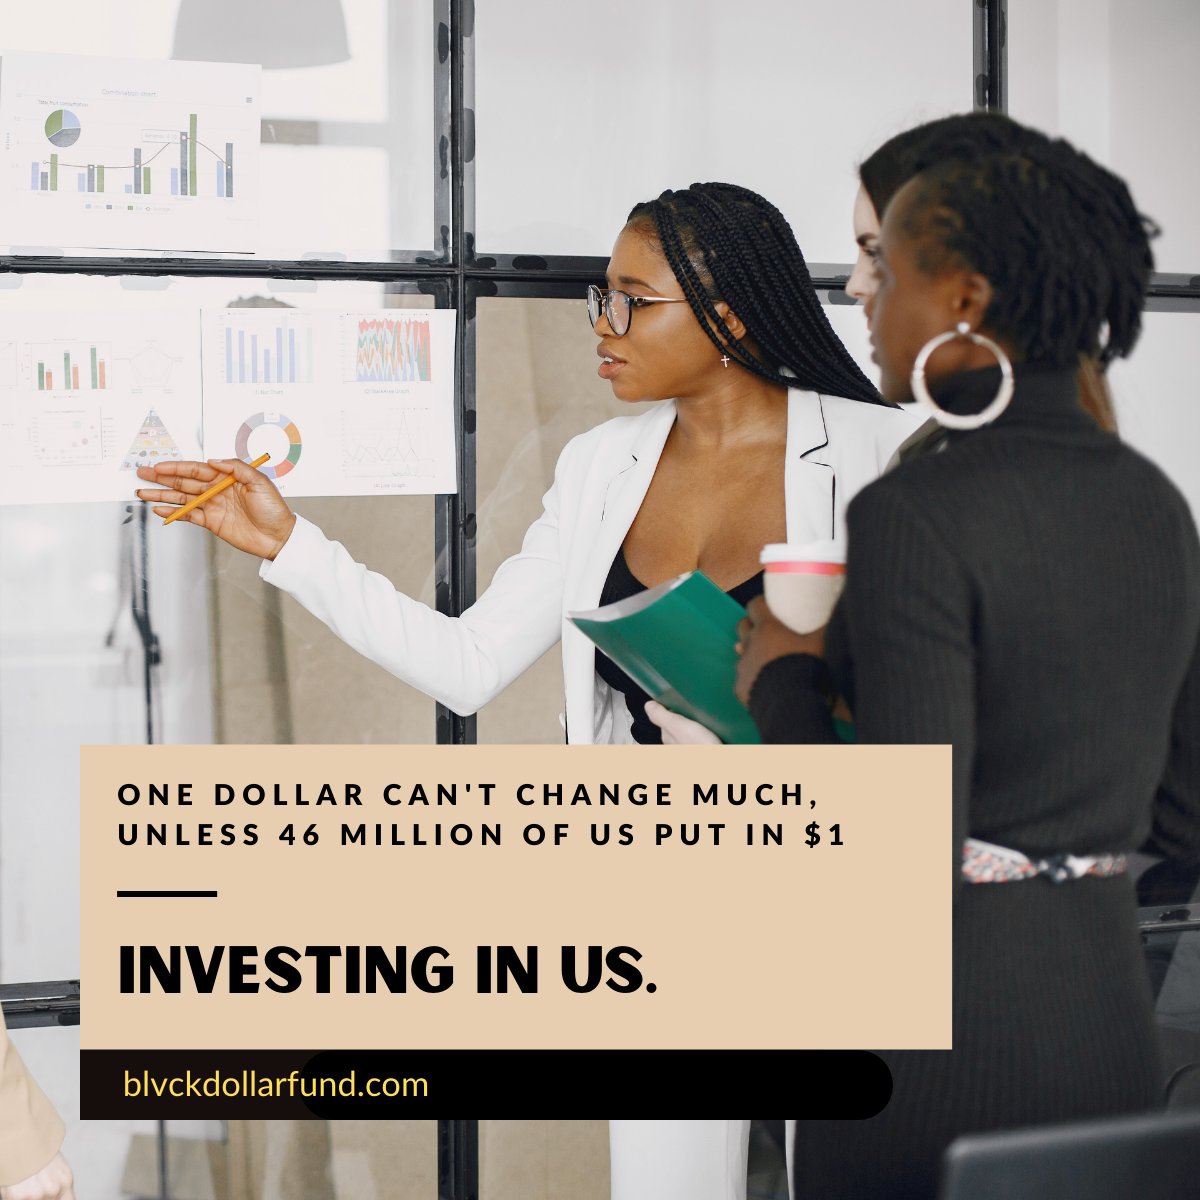 We are an organization dedicated to supporting #blackentrepreneurship and helping to close the wealth gap in our society. 

Website: lnkd.in/gEBGbh2Q 

#investinblackbusinesses #blackentrepreneurship #wealthgap #blvckdollarfund #funding #needfunding